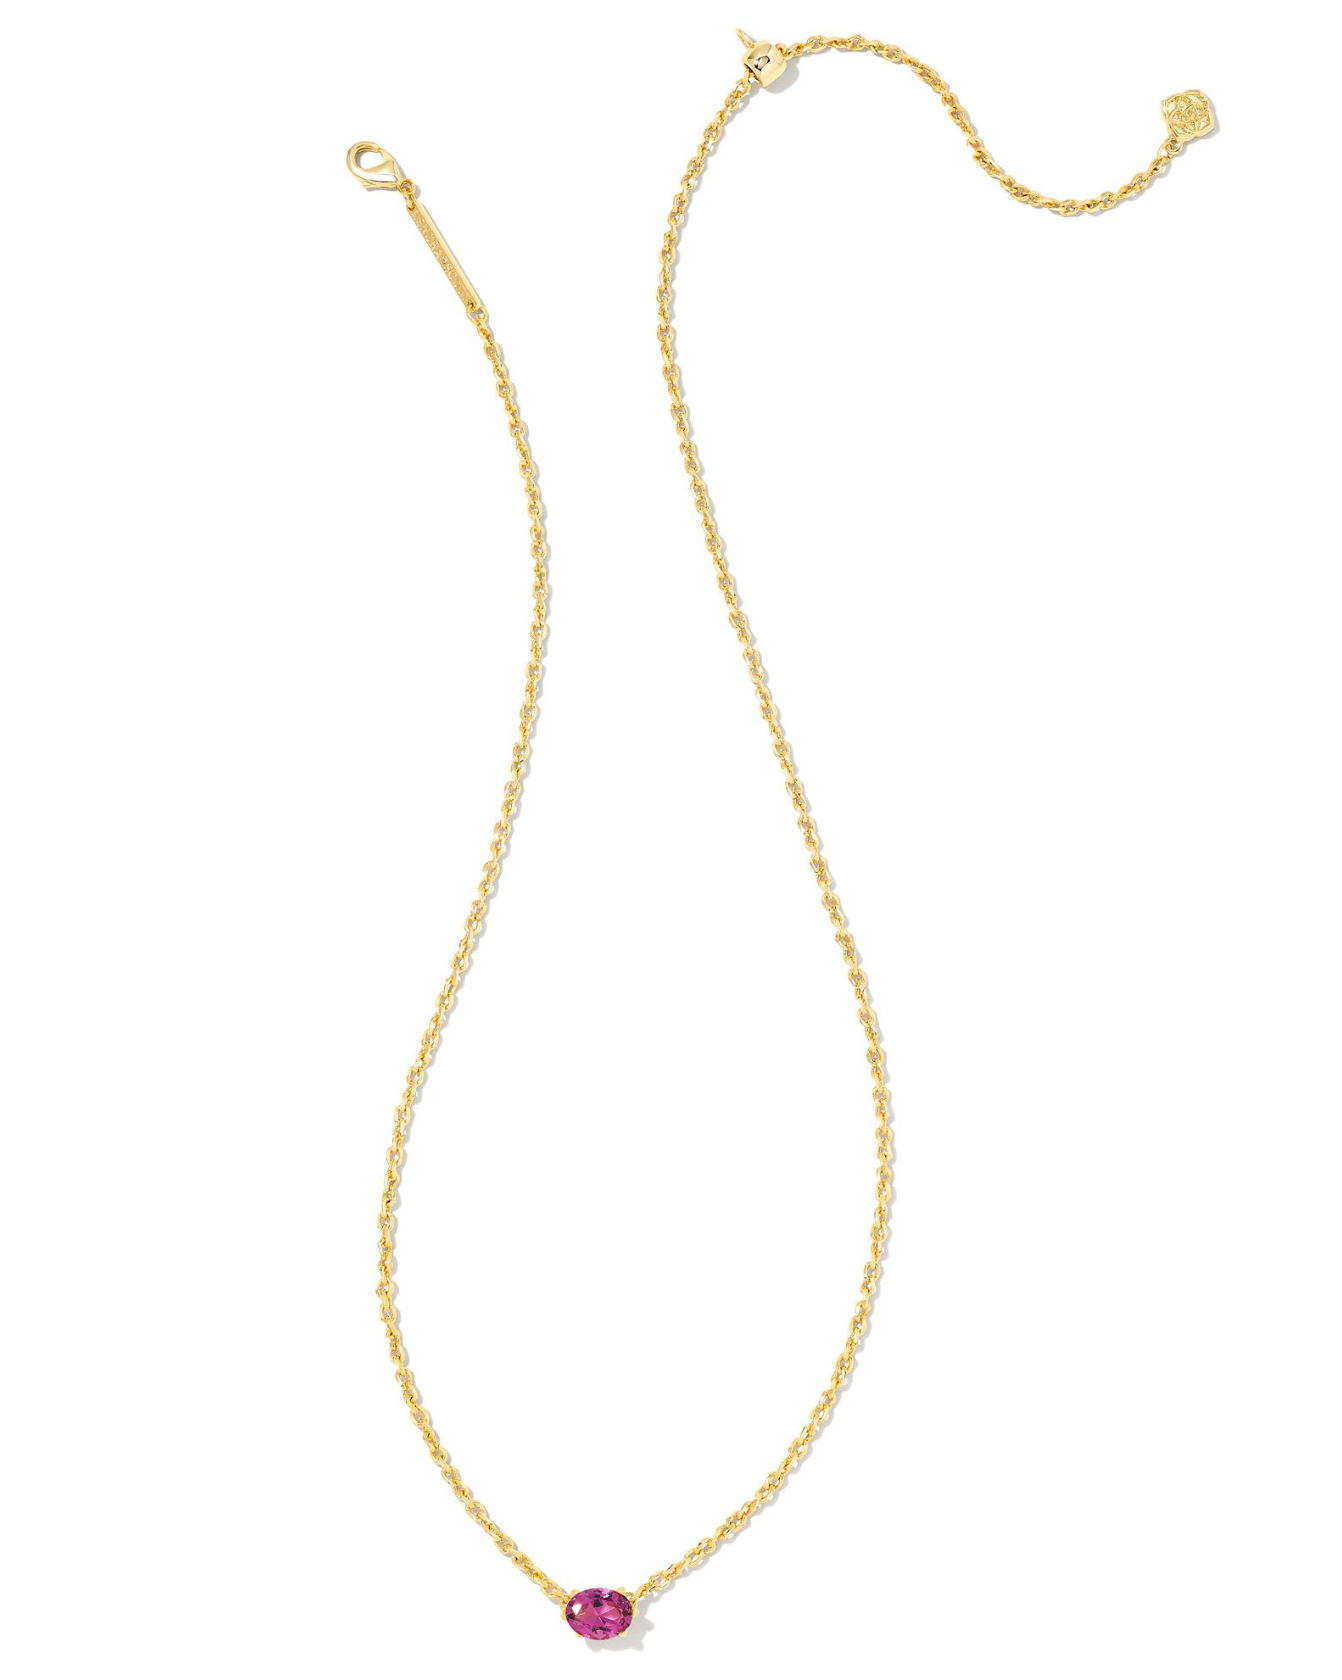 Cailin Gold Pendant Necklace in Purple Crystal | KENDRA SCOTT - The Street Boutique 